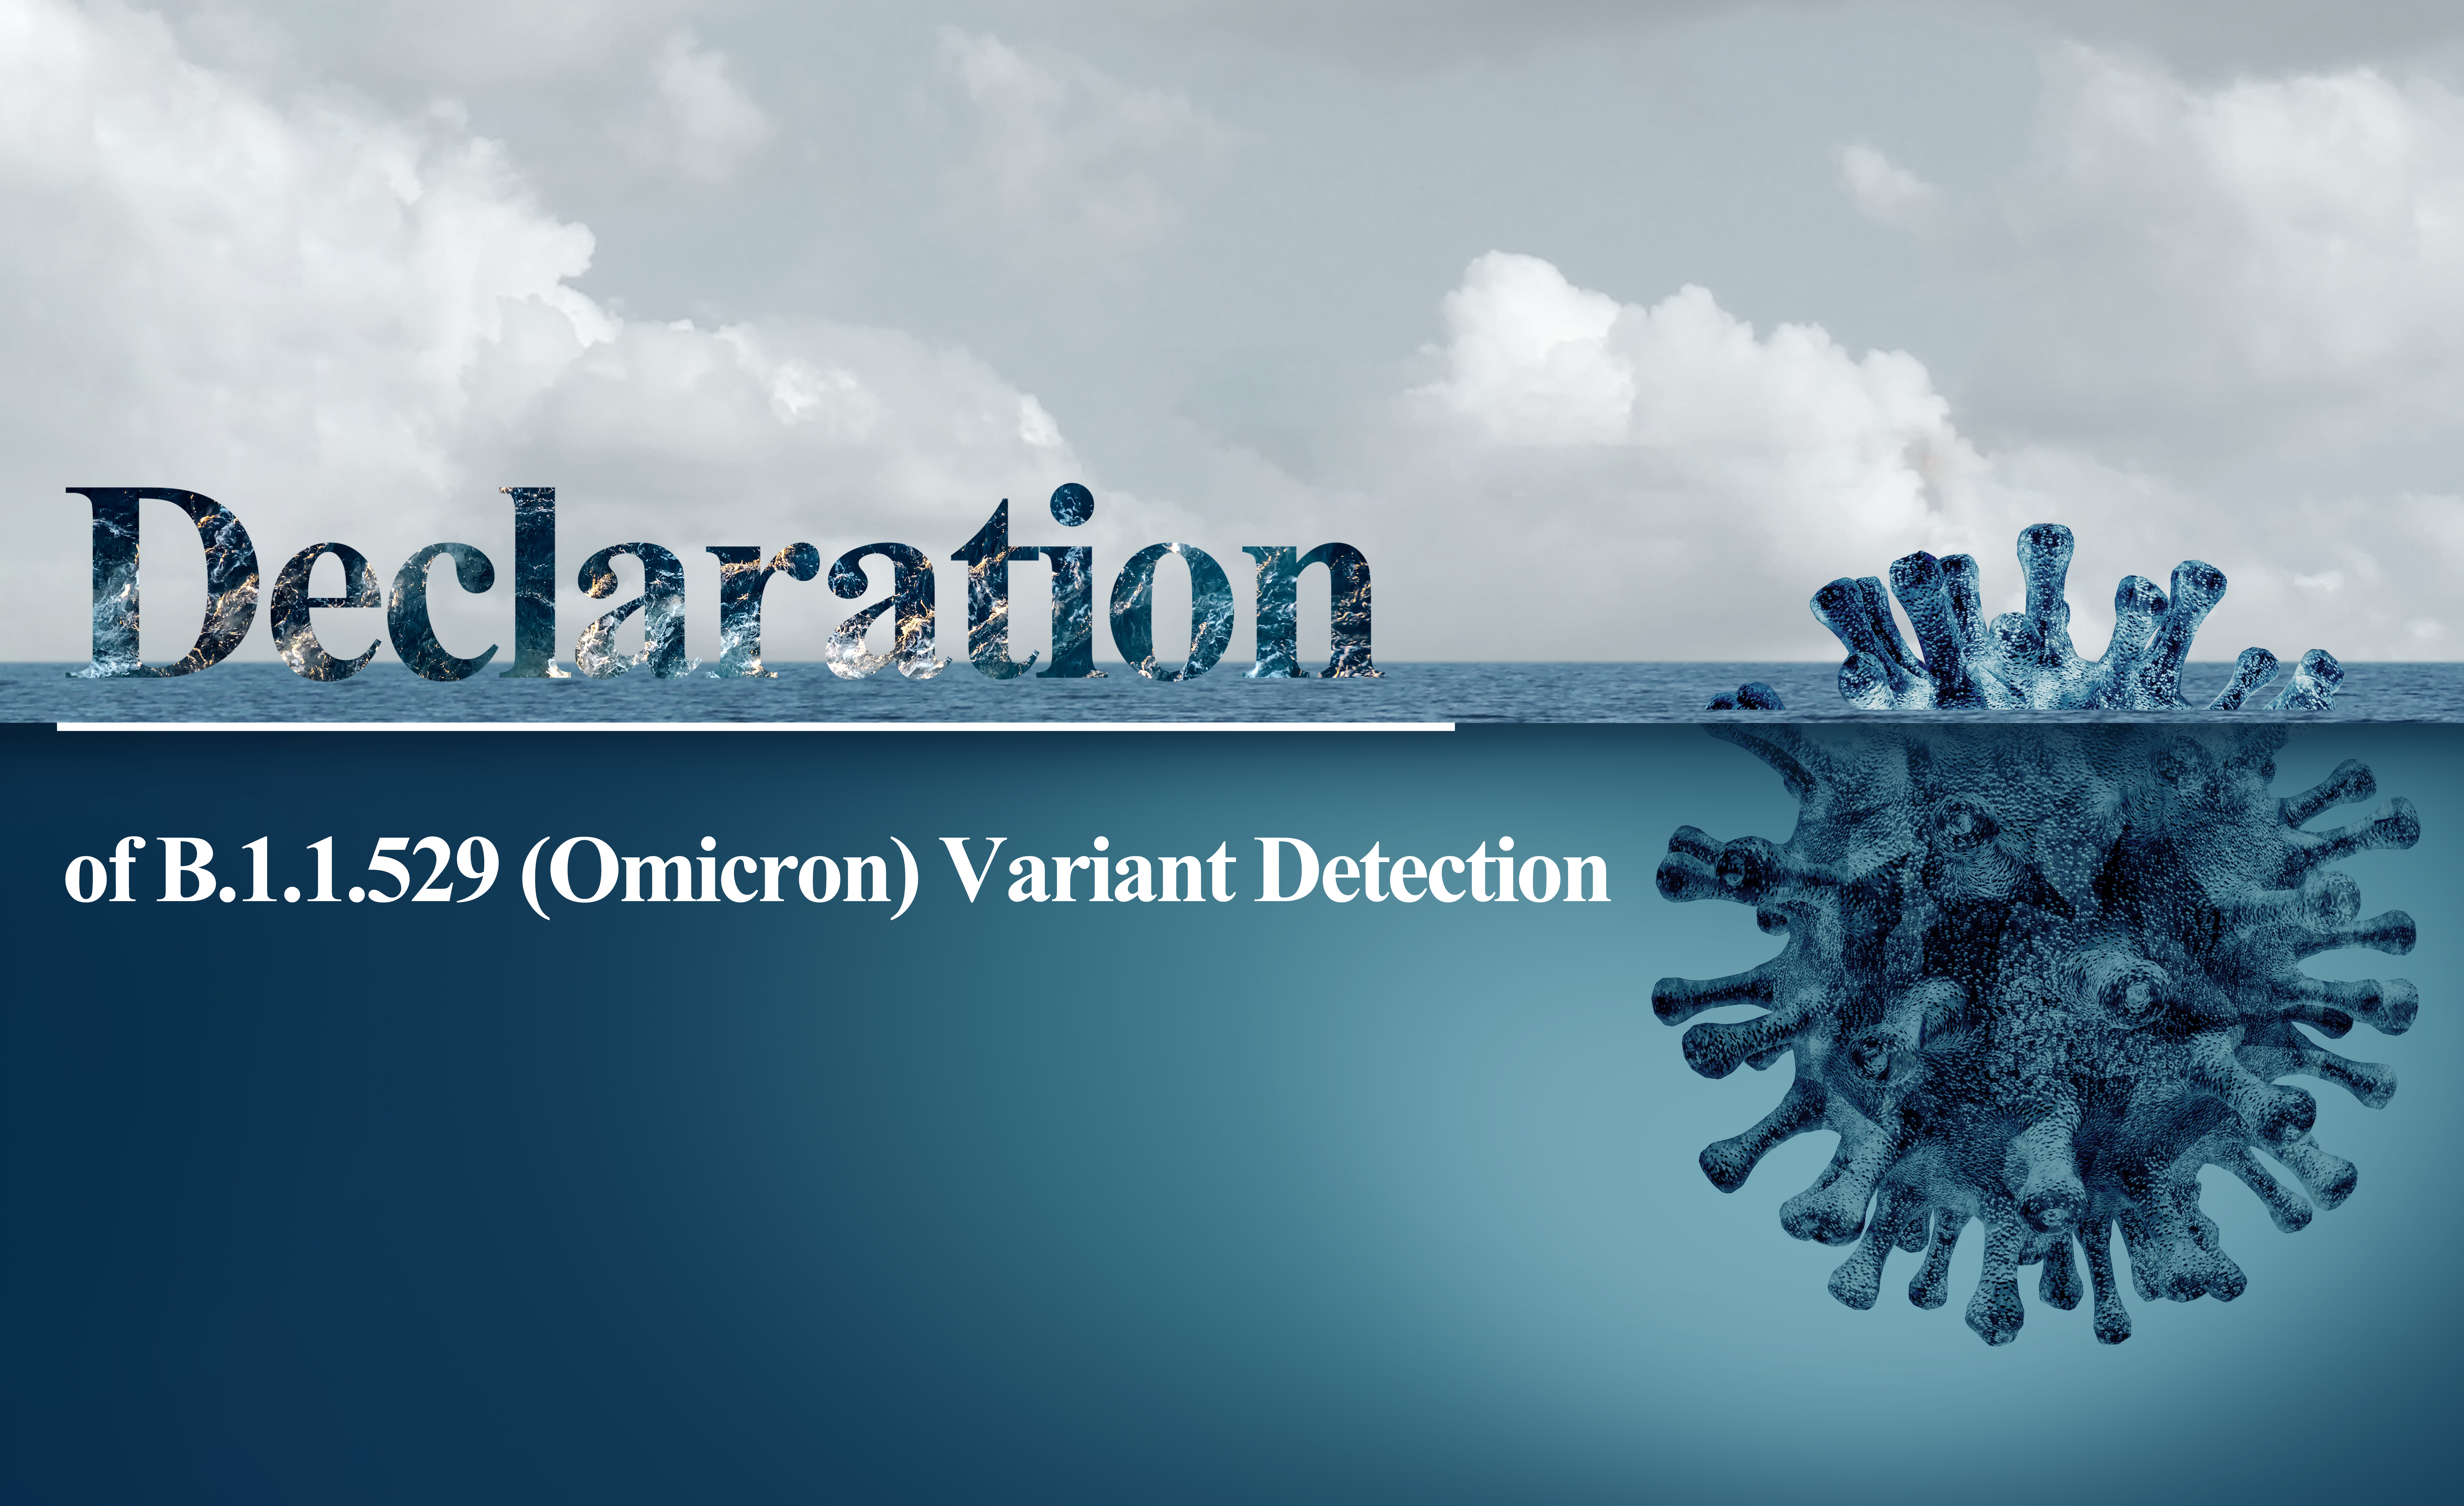 Declaration of B.1.1.529 Variant (Omicron) Detection